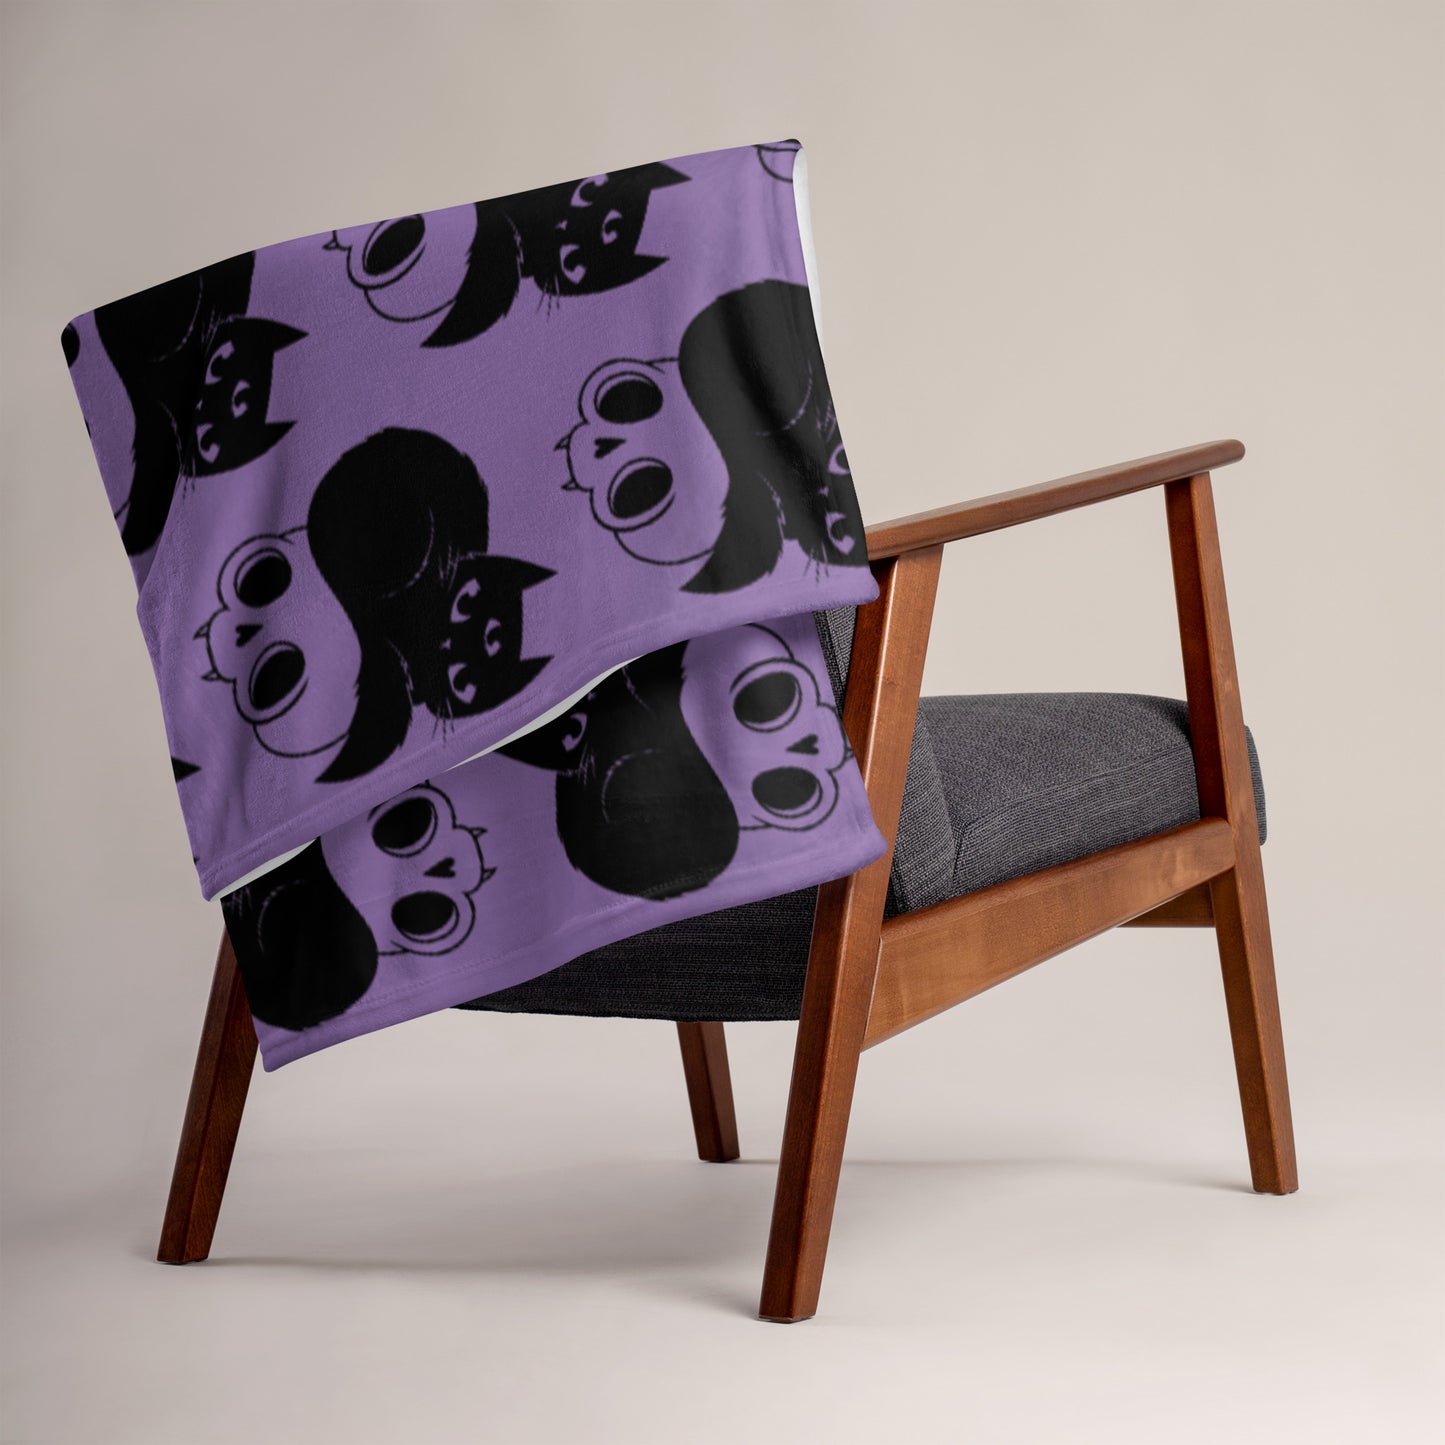 Soft-Touch Throw Blanket: Black Cat with Skull (ce soir purple)